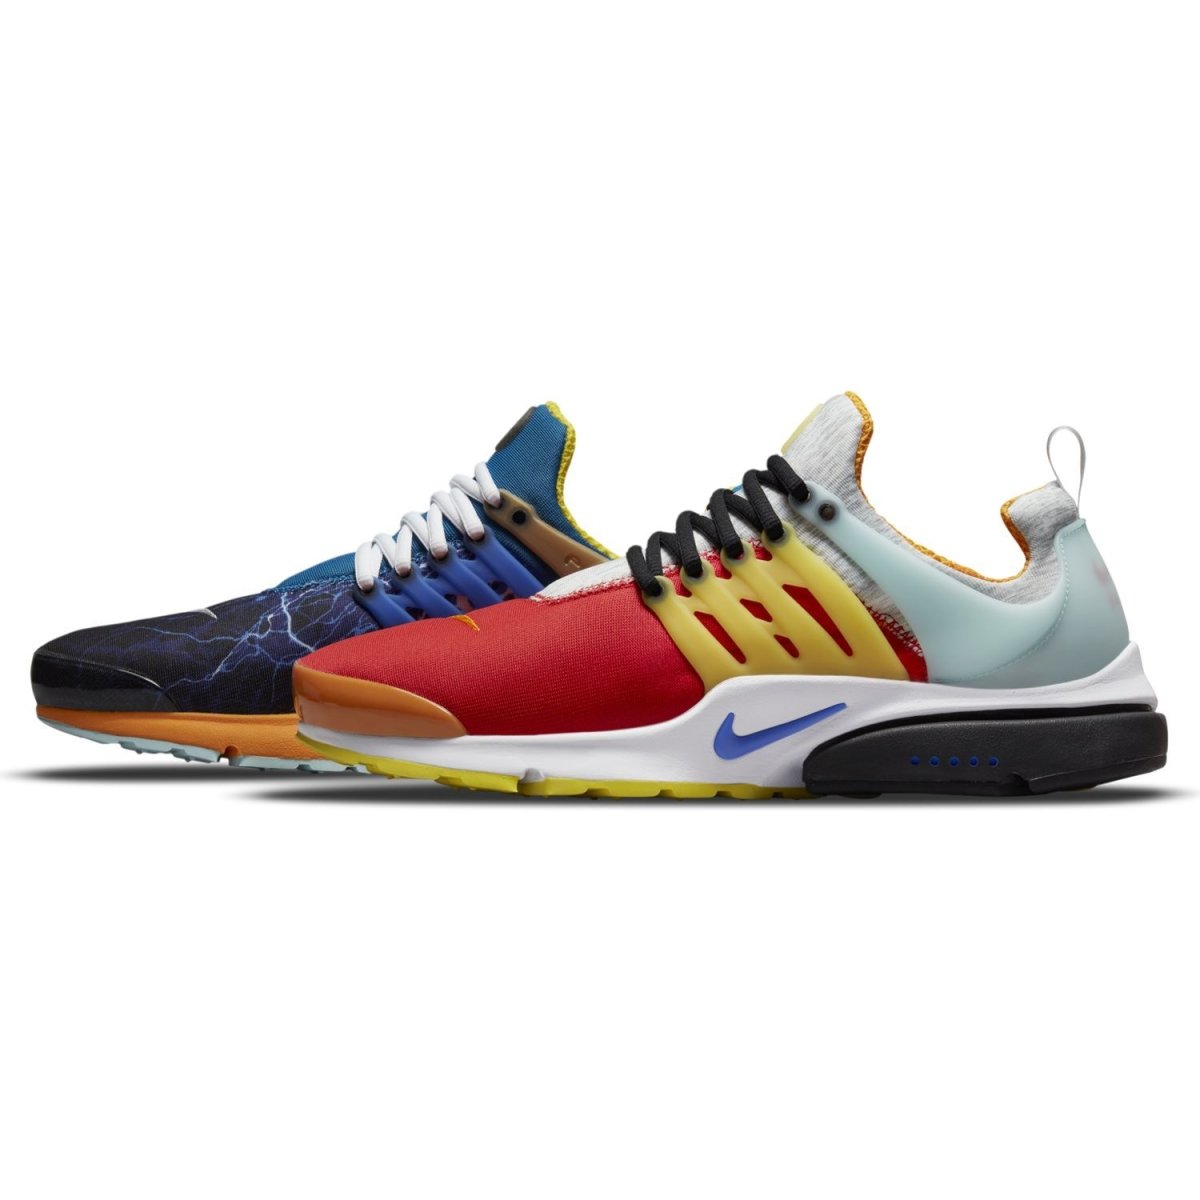 Nike Air Presto "What The" (DM9554-900) – ATHLETIC CO.